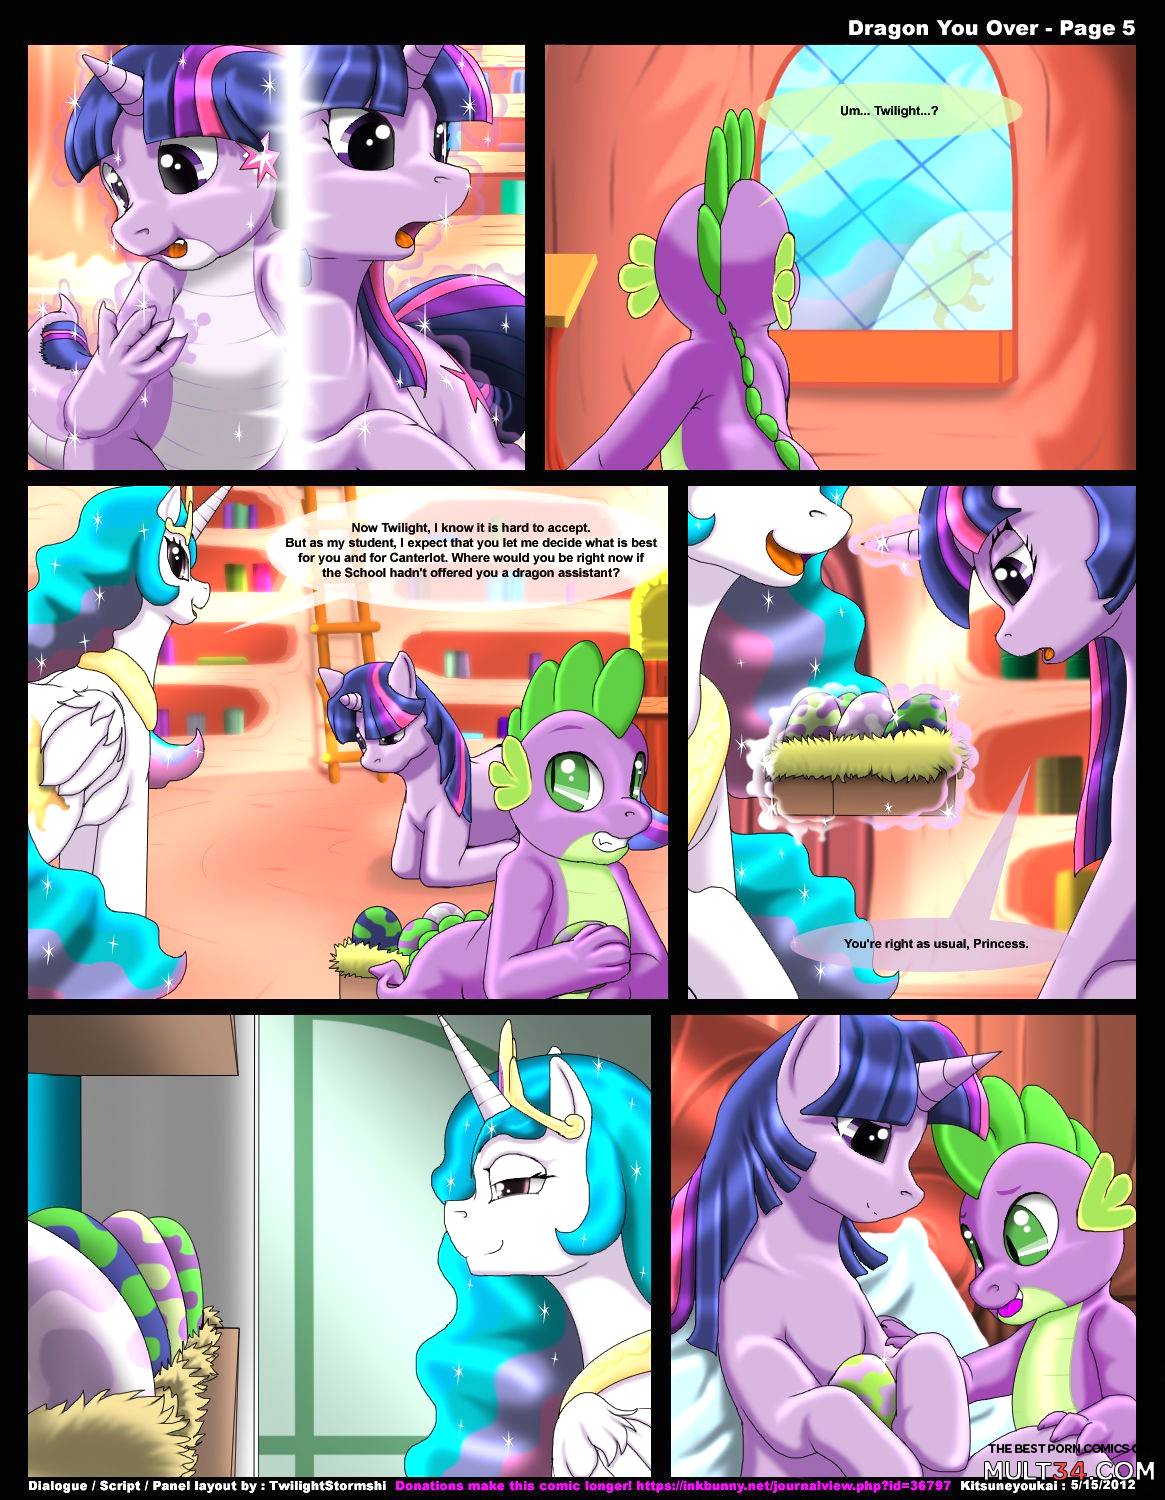 Dragon You Over page 8